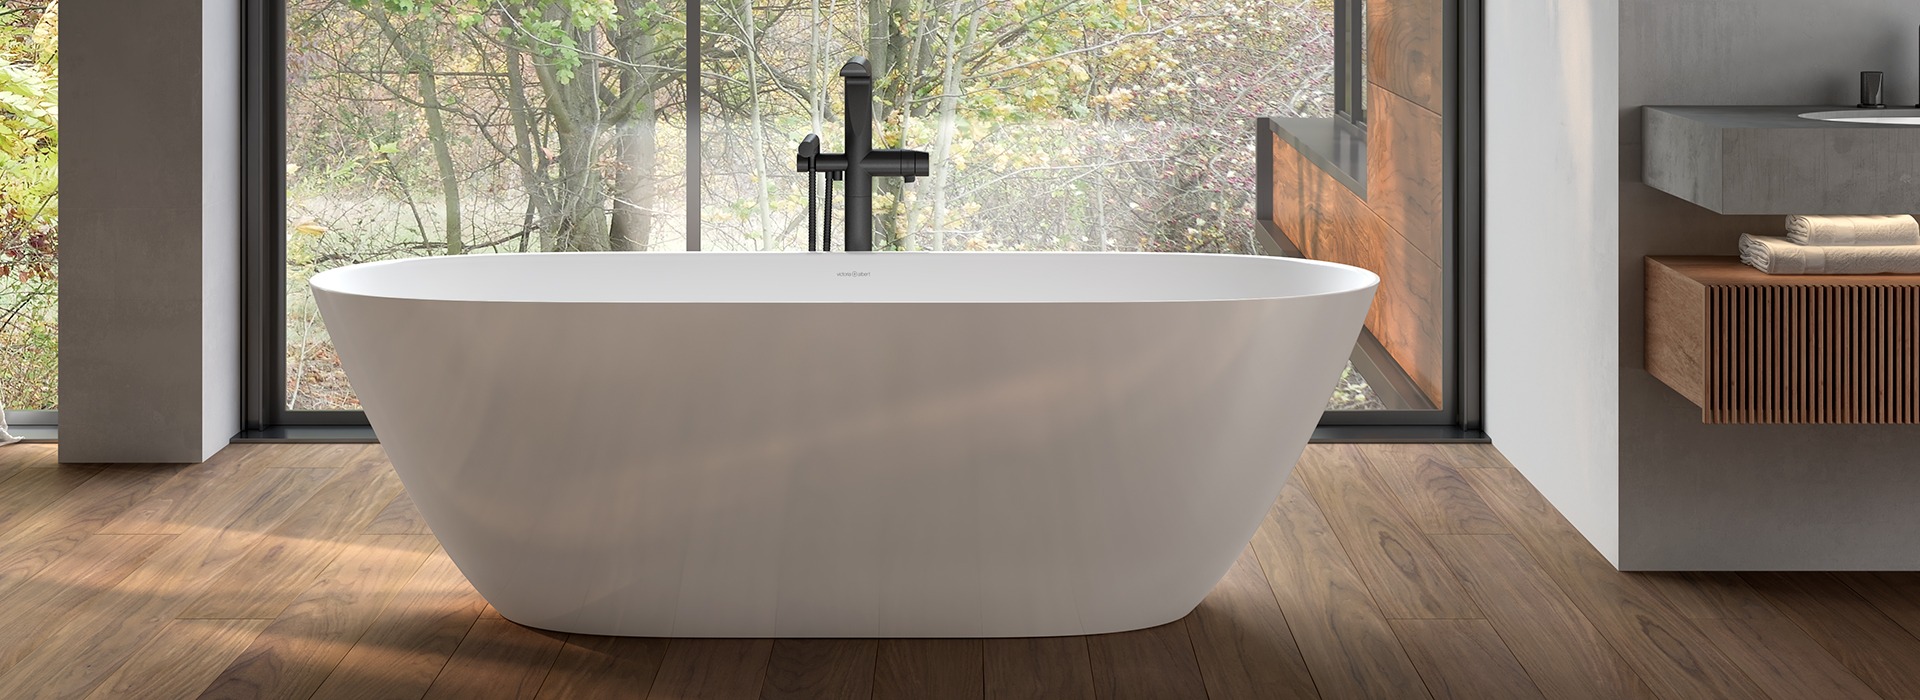 Italtile Unveils Exclusive New Lussari Range From Luxury Bath Manufacturers V&A